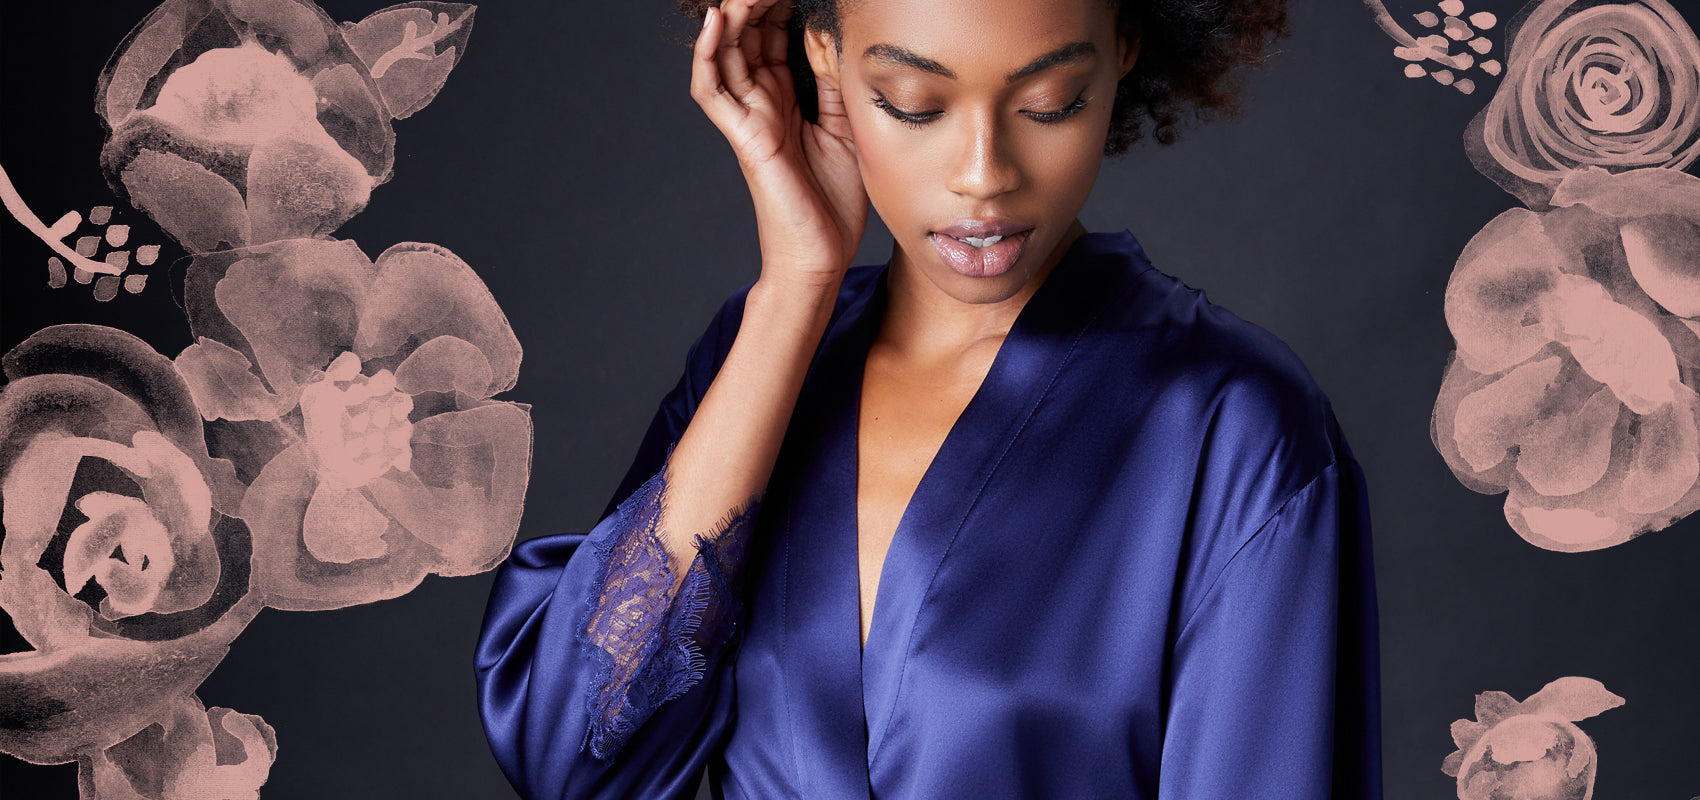 CELEBRATE MOTHER'S DAY WITH JOURNELLE - SHOP OUR TOP PICKS